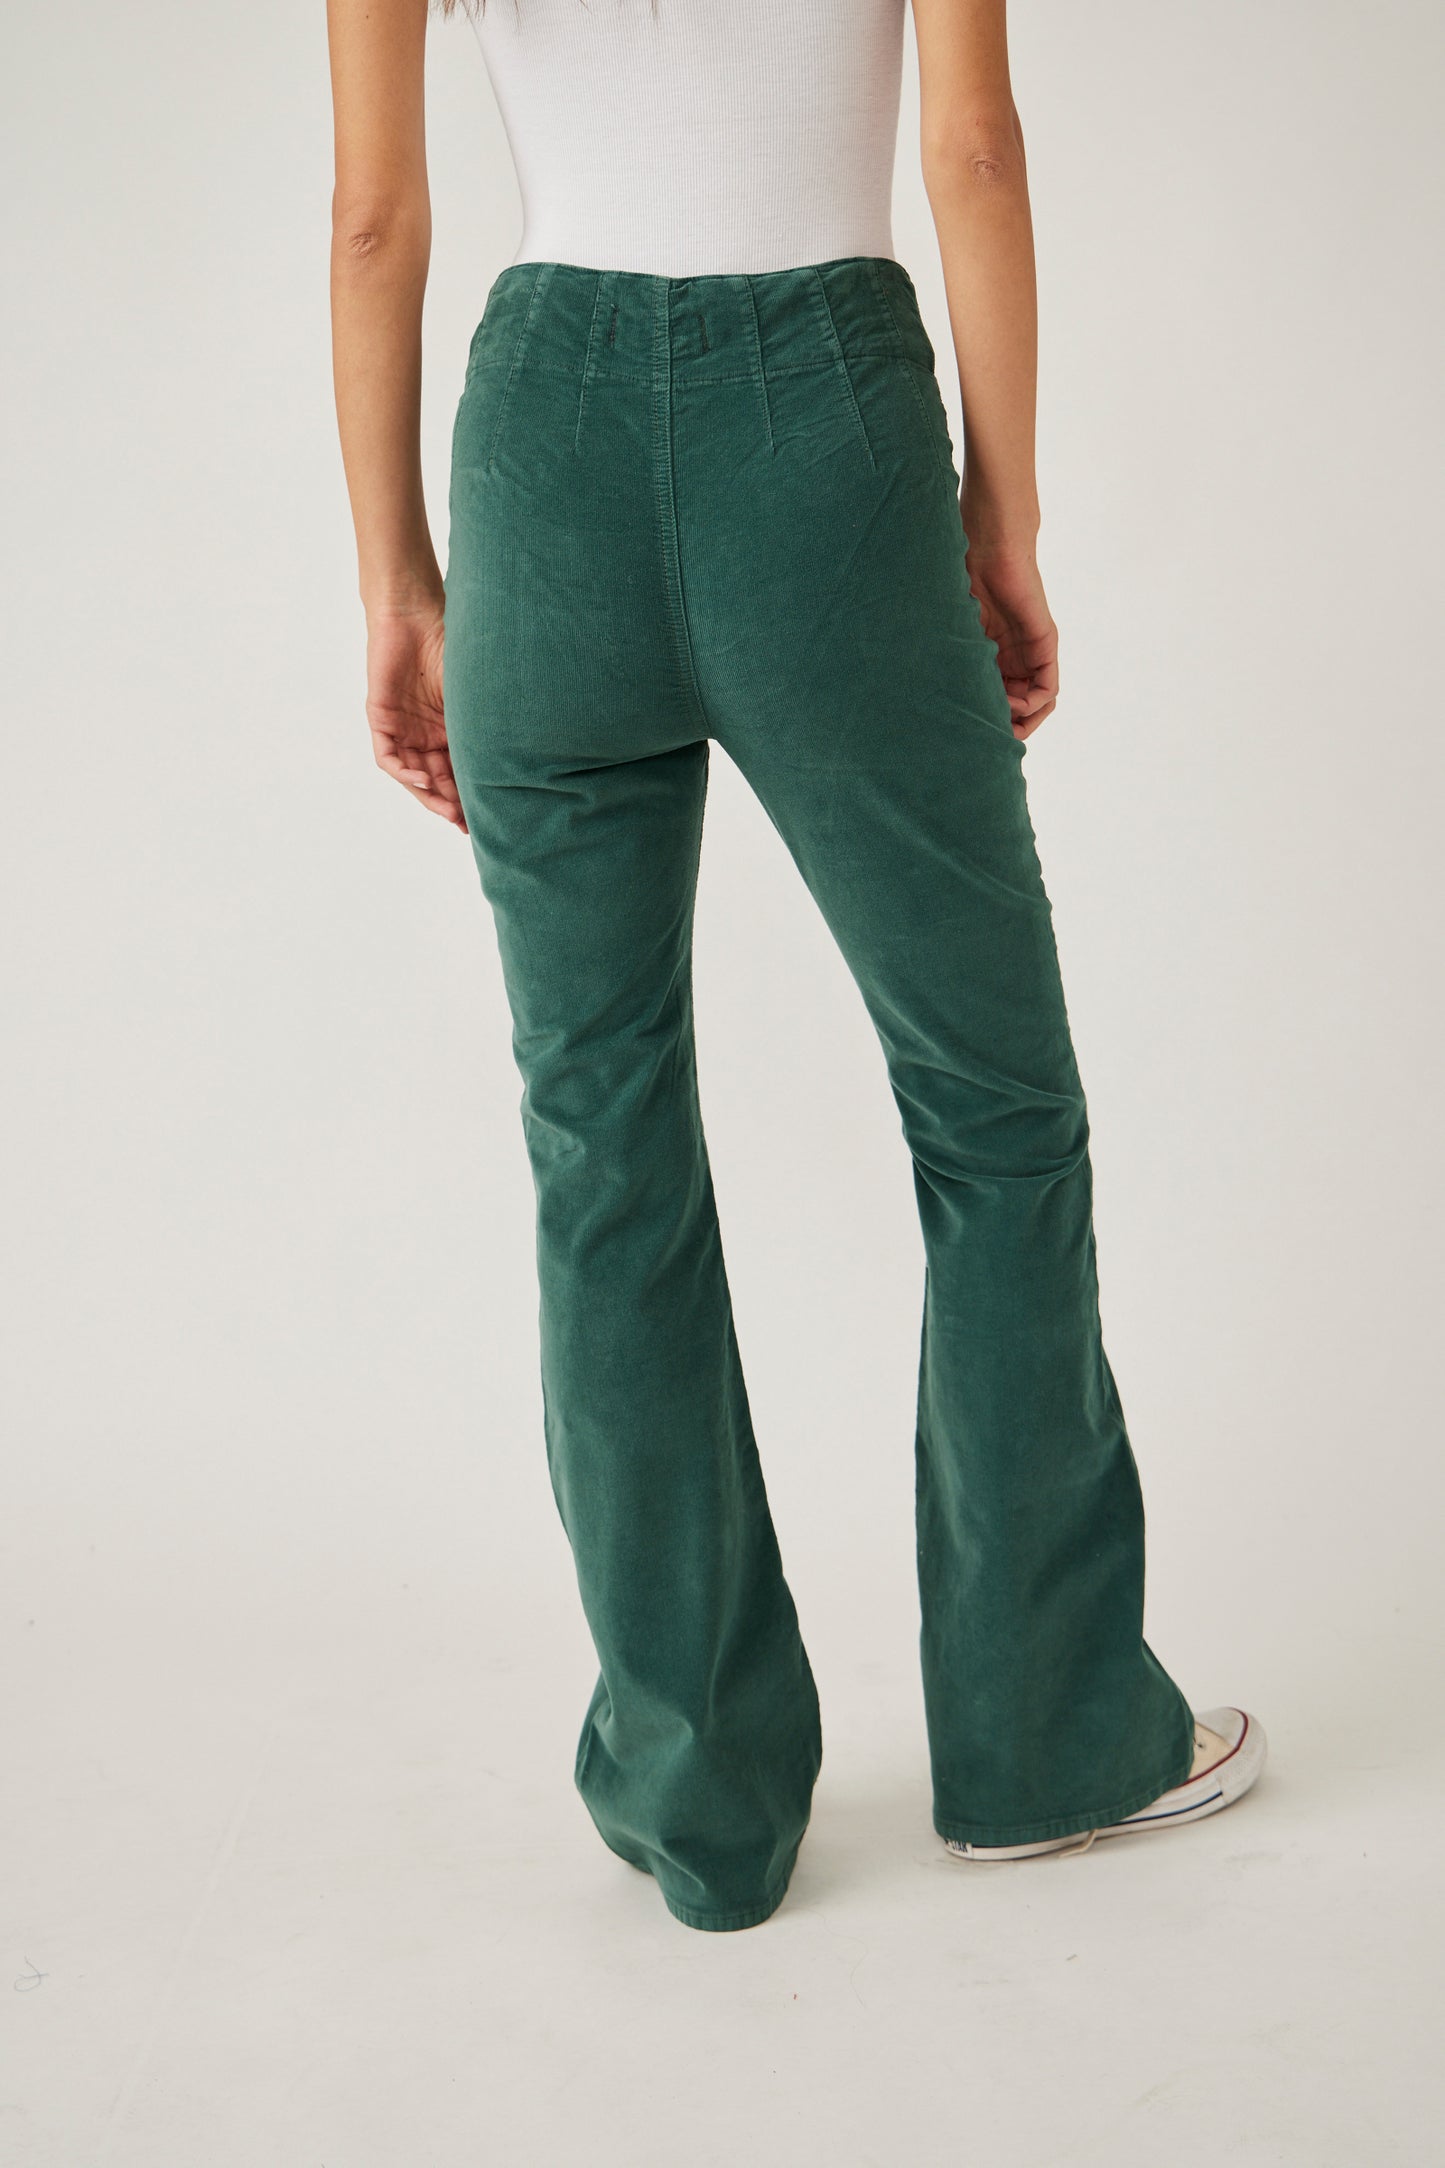 Free People Jayde Cord Flare Jeans - Huntress Green